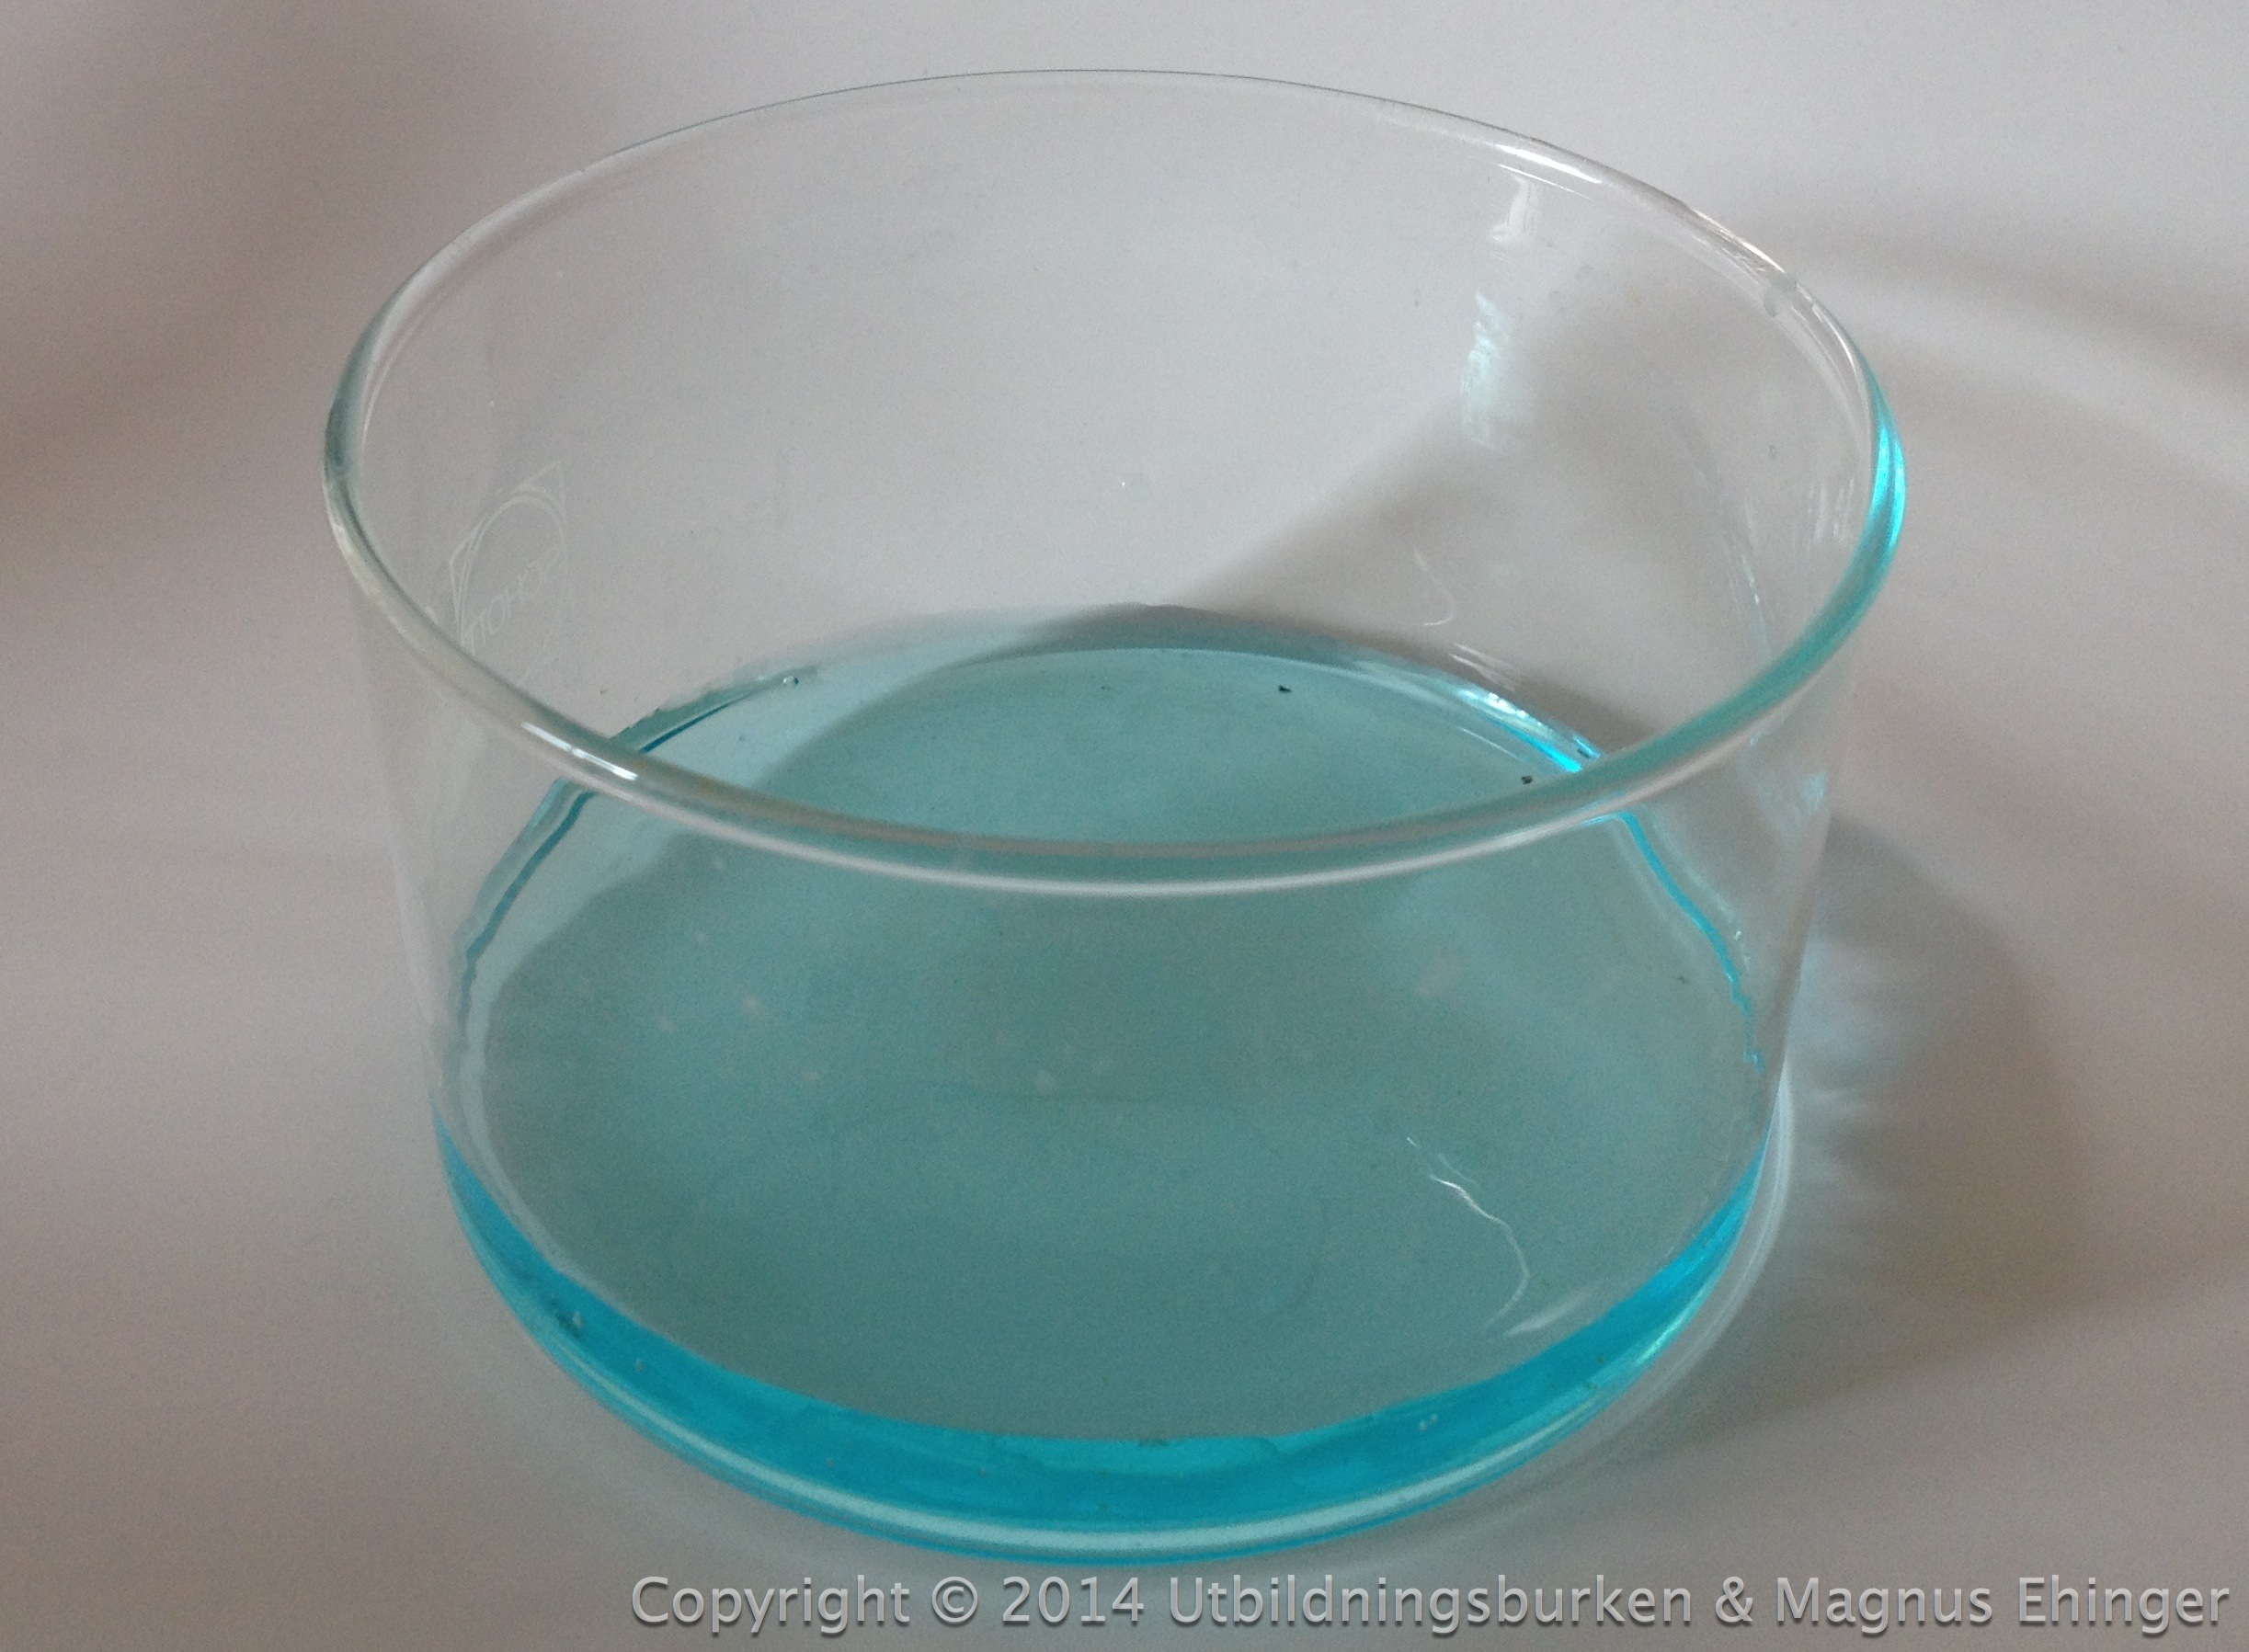 If a solid substance is dissolved in a liquid, e.g. water, the two substances may be separated if the water evaporates.